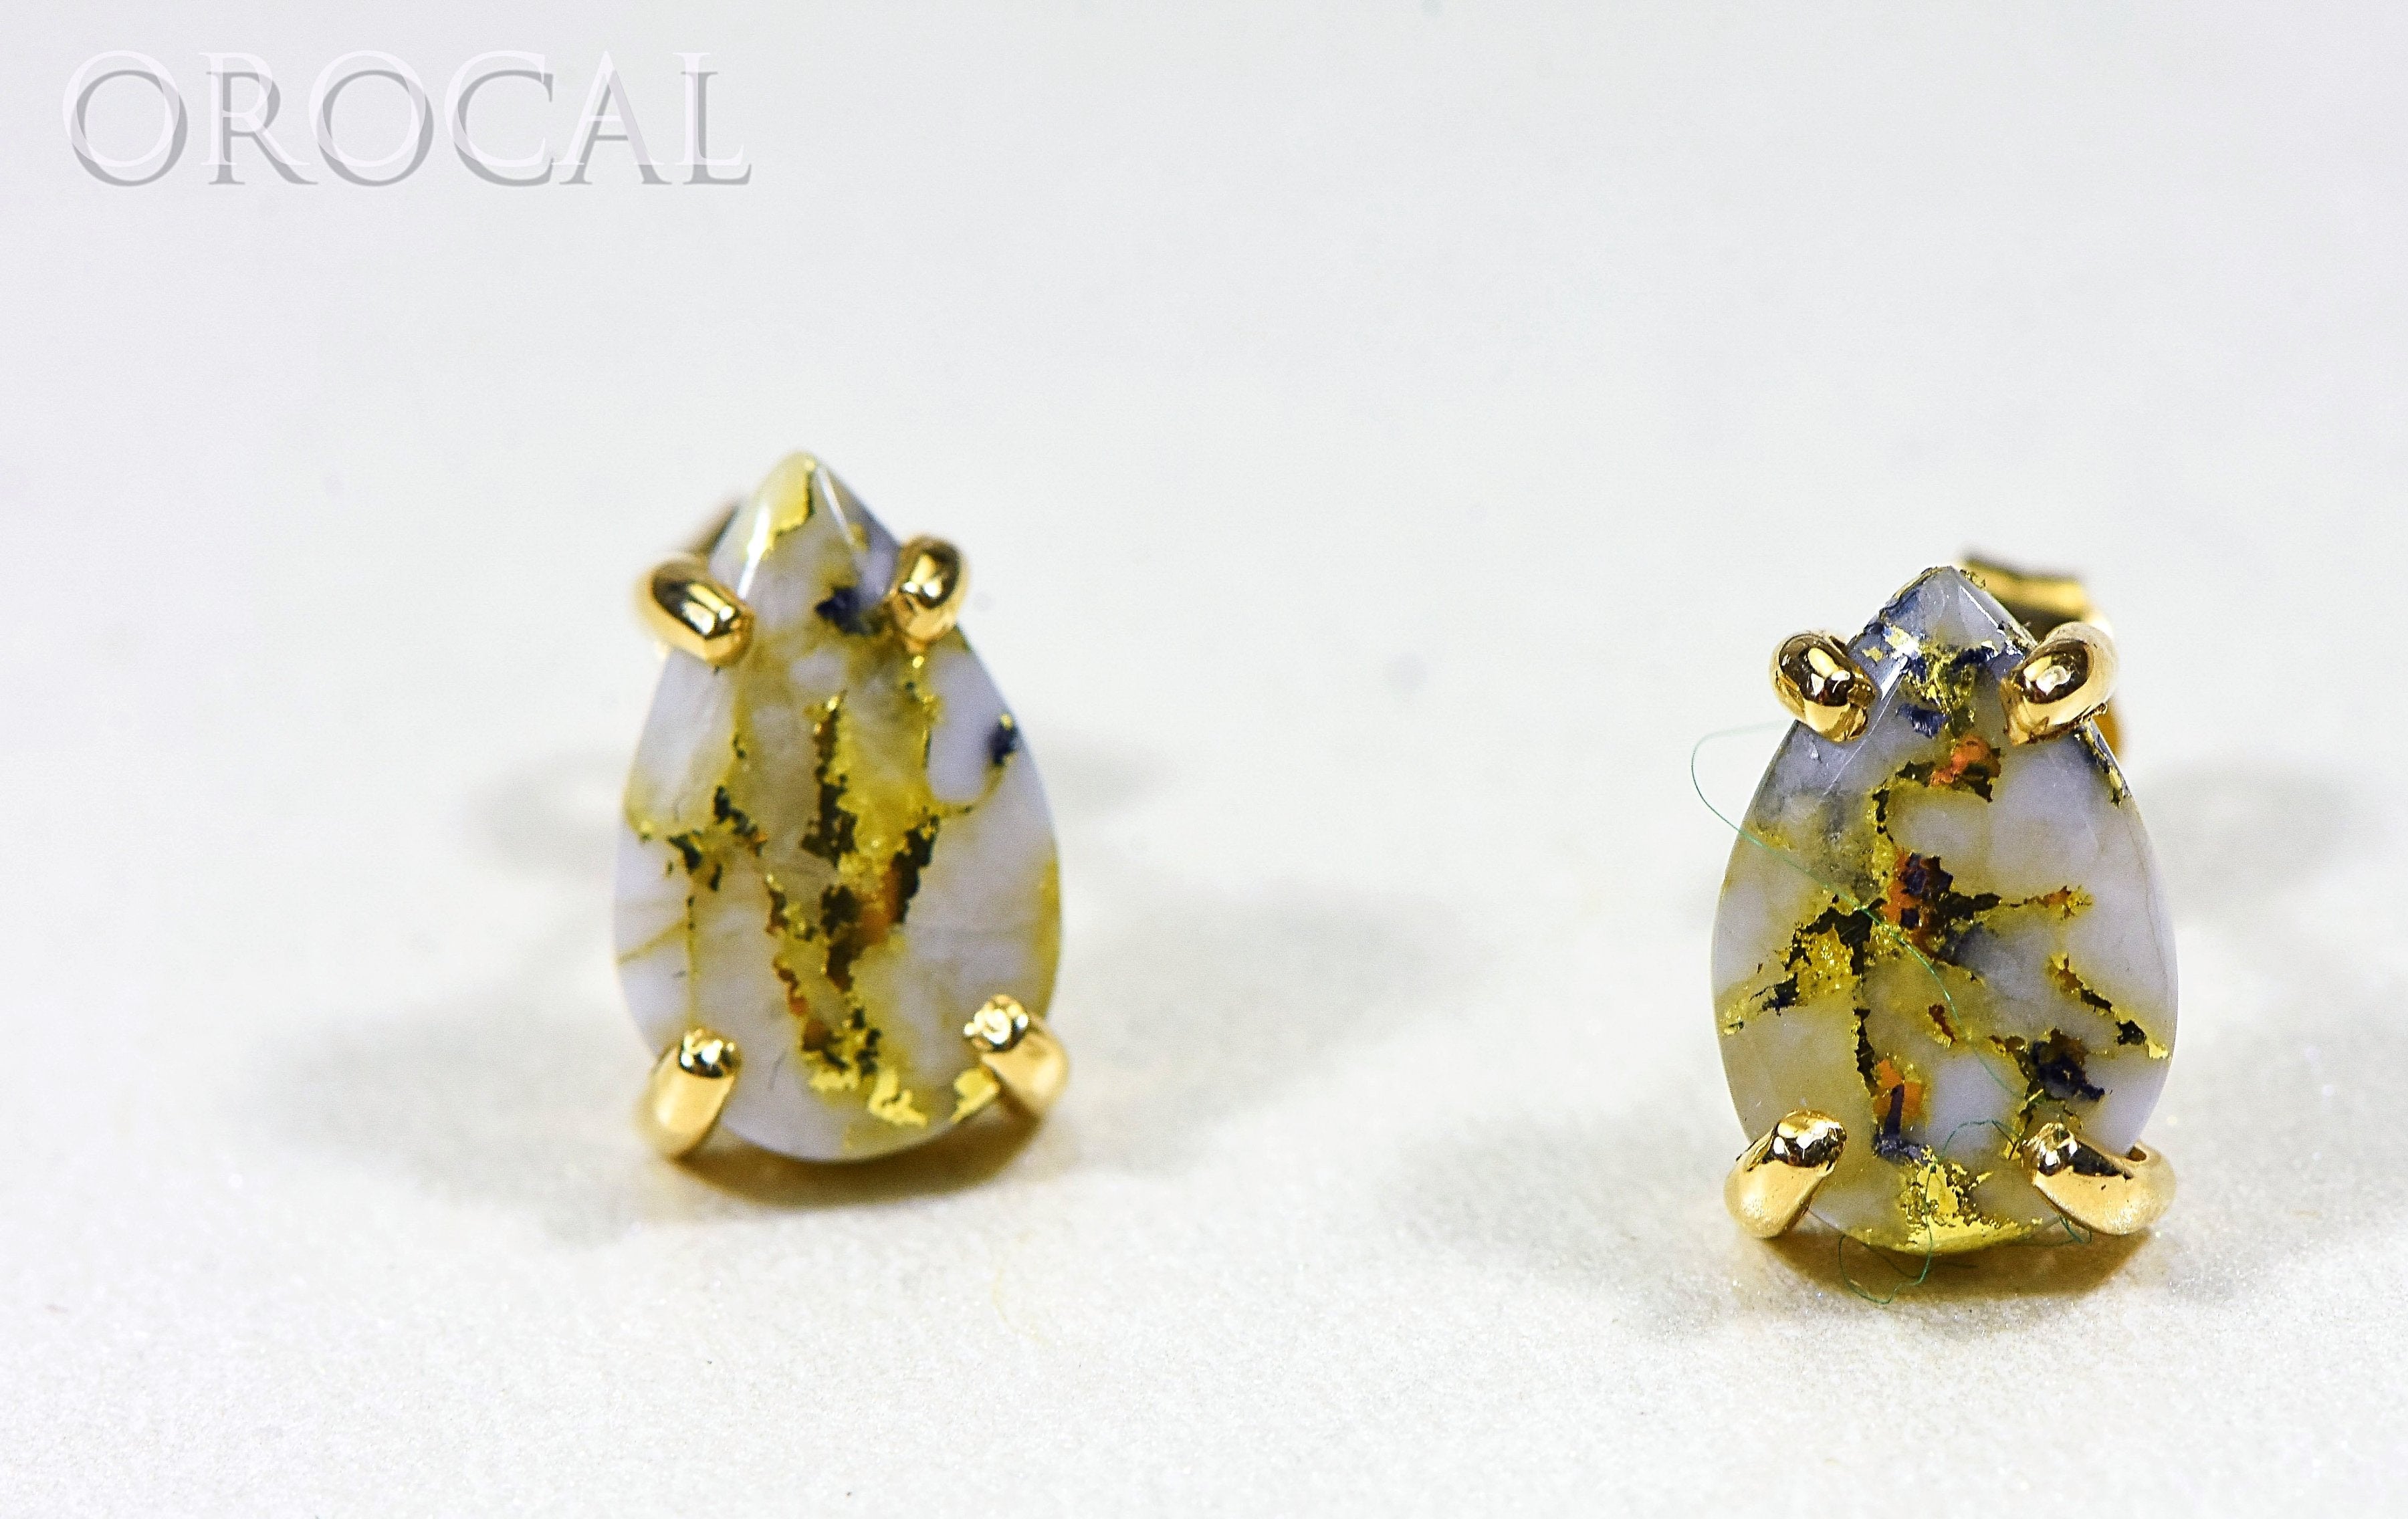 Gold Quartz Earrings "Orocal" E10*7Q Genuine Hand Crafted Jewelry - 14K Gold Casting